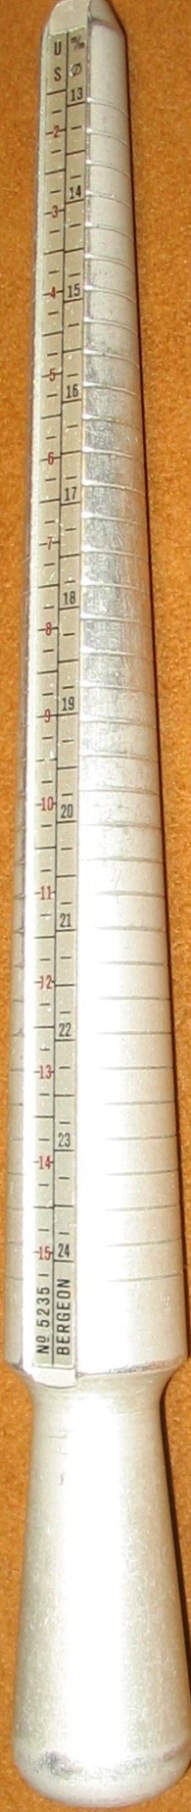 Ring stick with U.S scale and diameter in mm. 